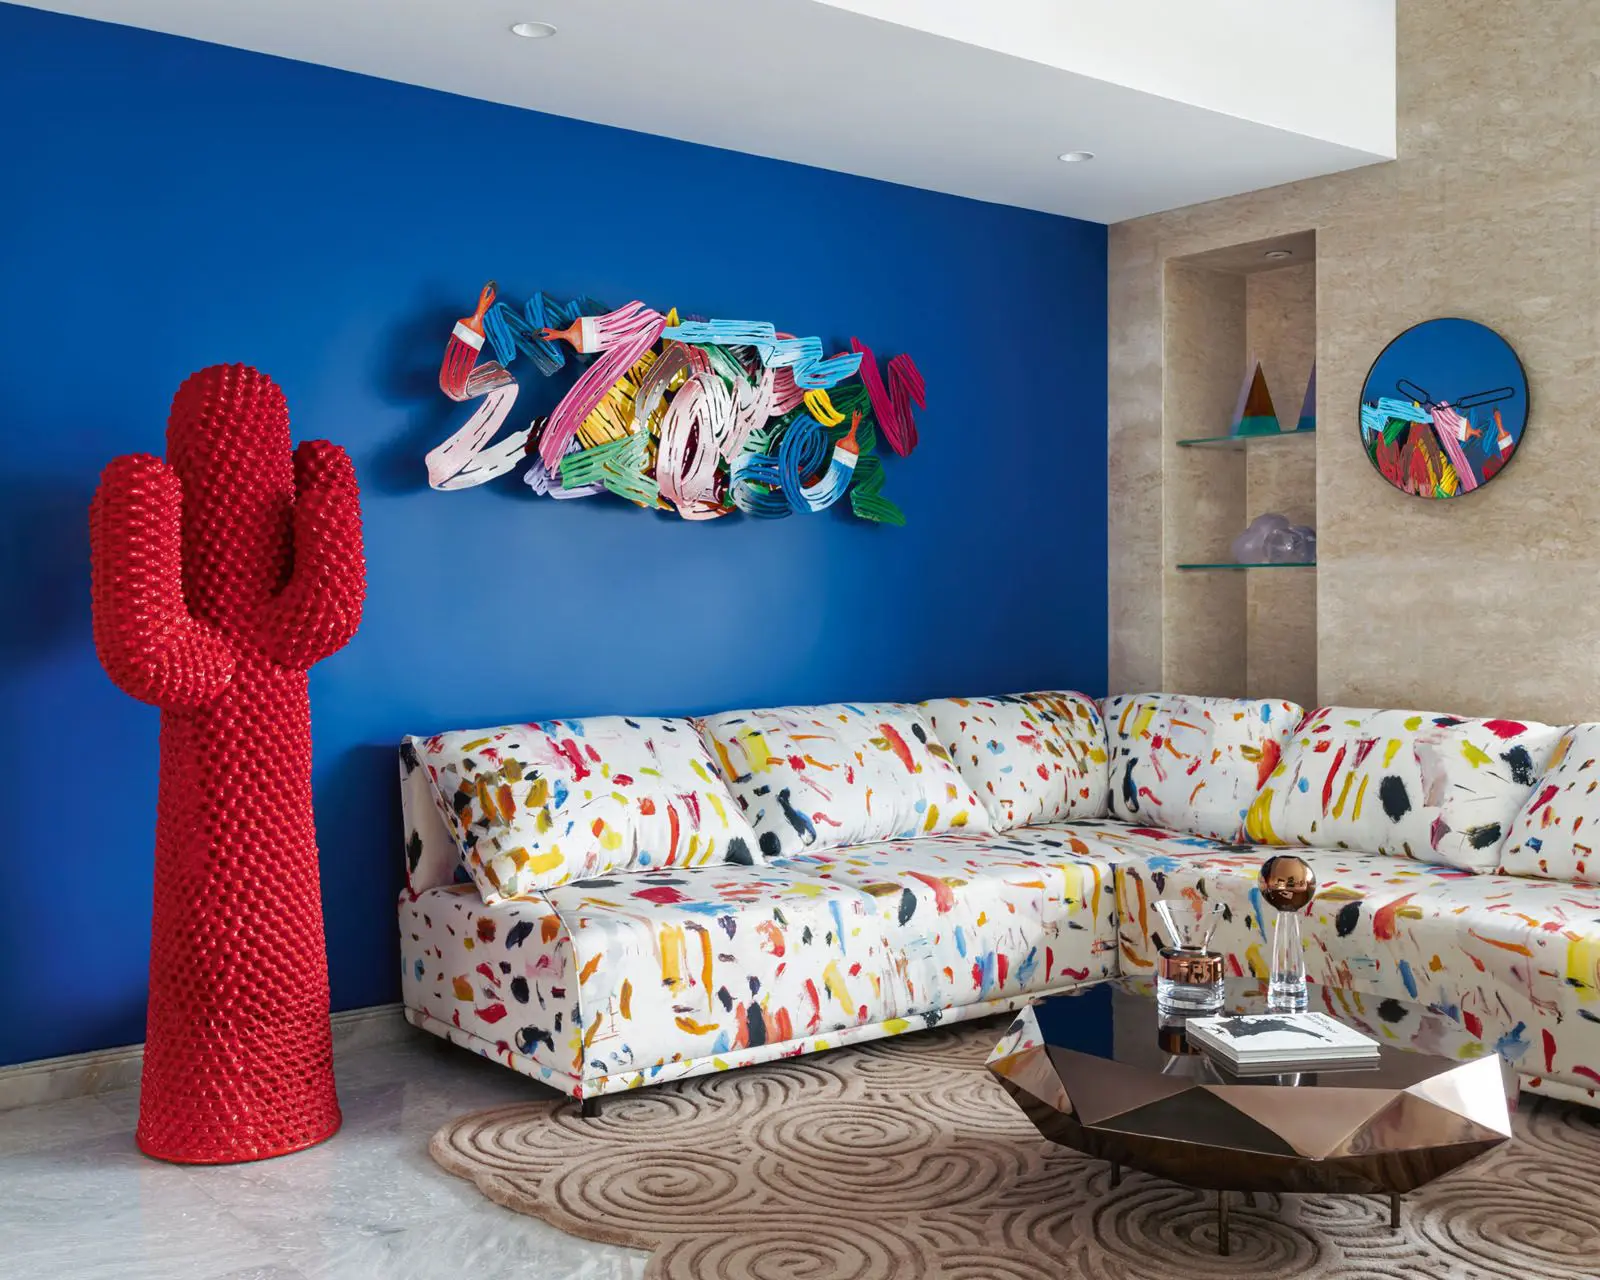 How designers are adding a pop of colour to interiors using epoxy